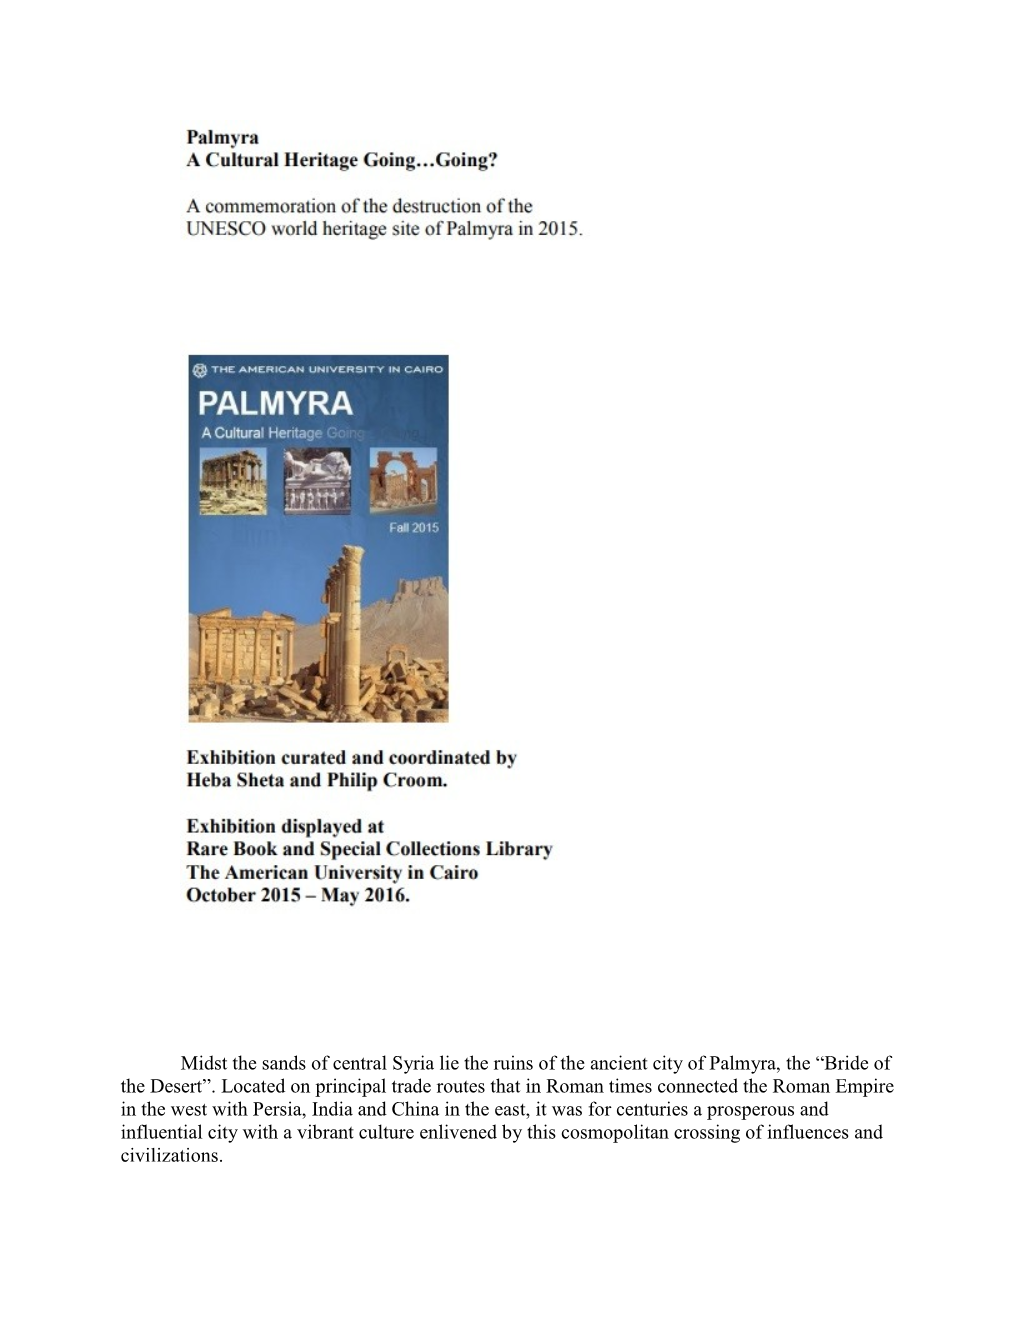 Midst the Sands of Central Syria Lie the Ruins of the Ancient City of Palmyra, the “Bride of the Desert”